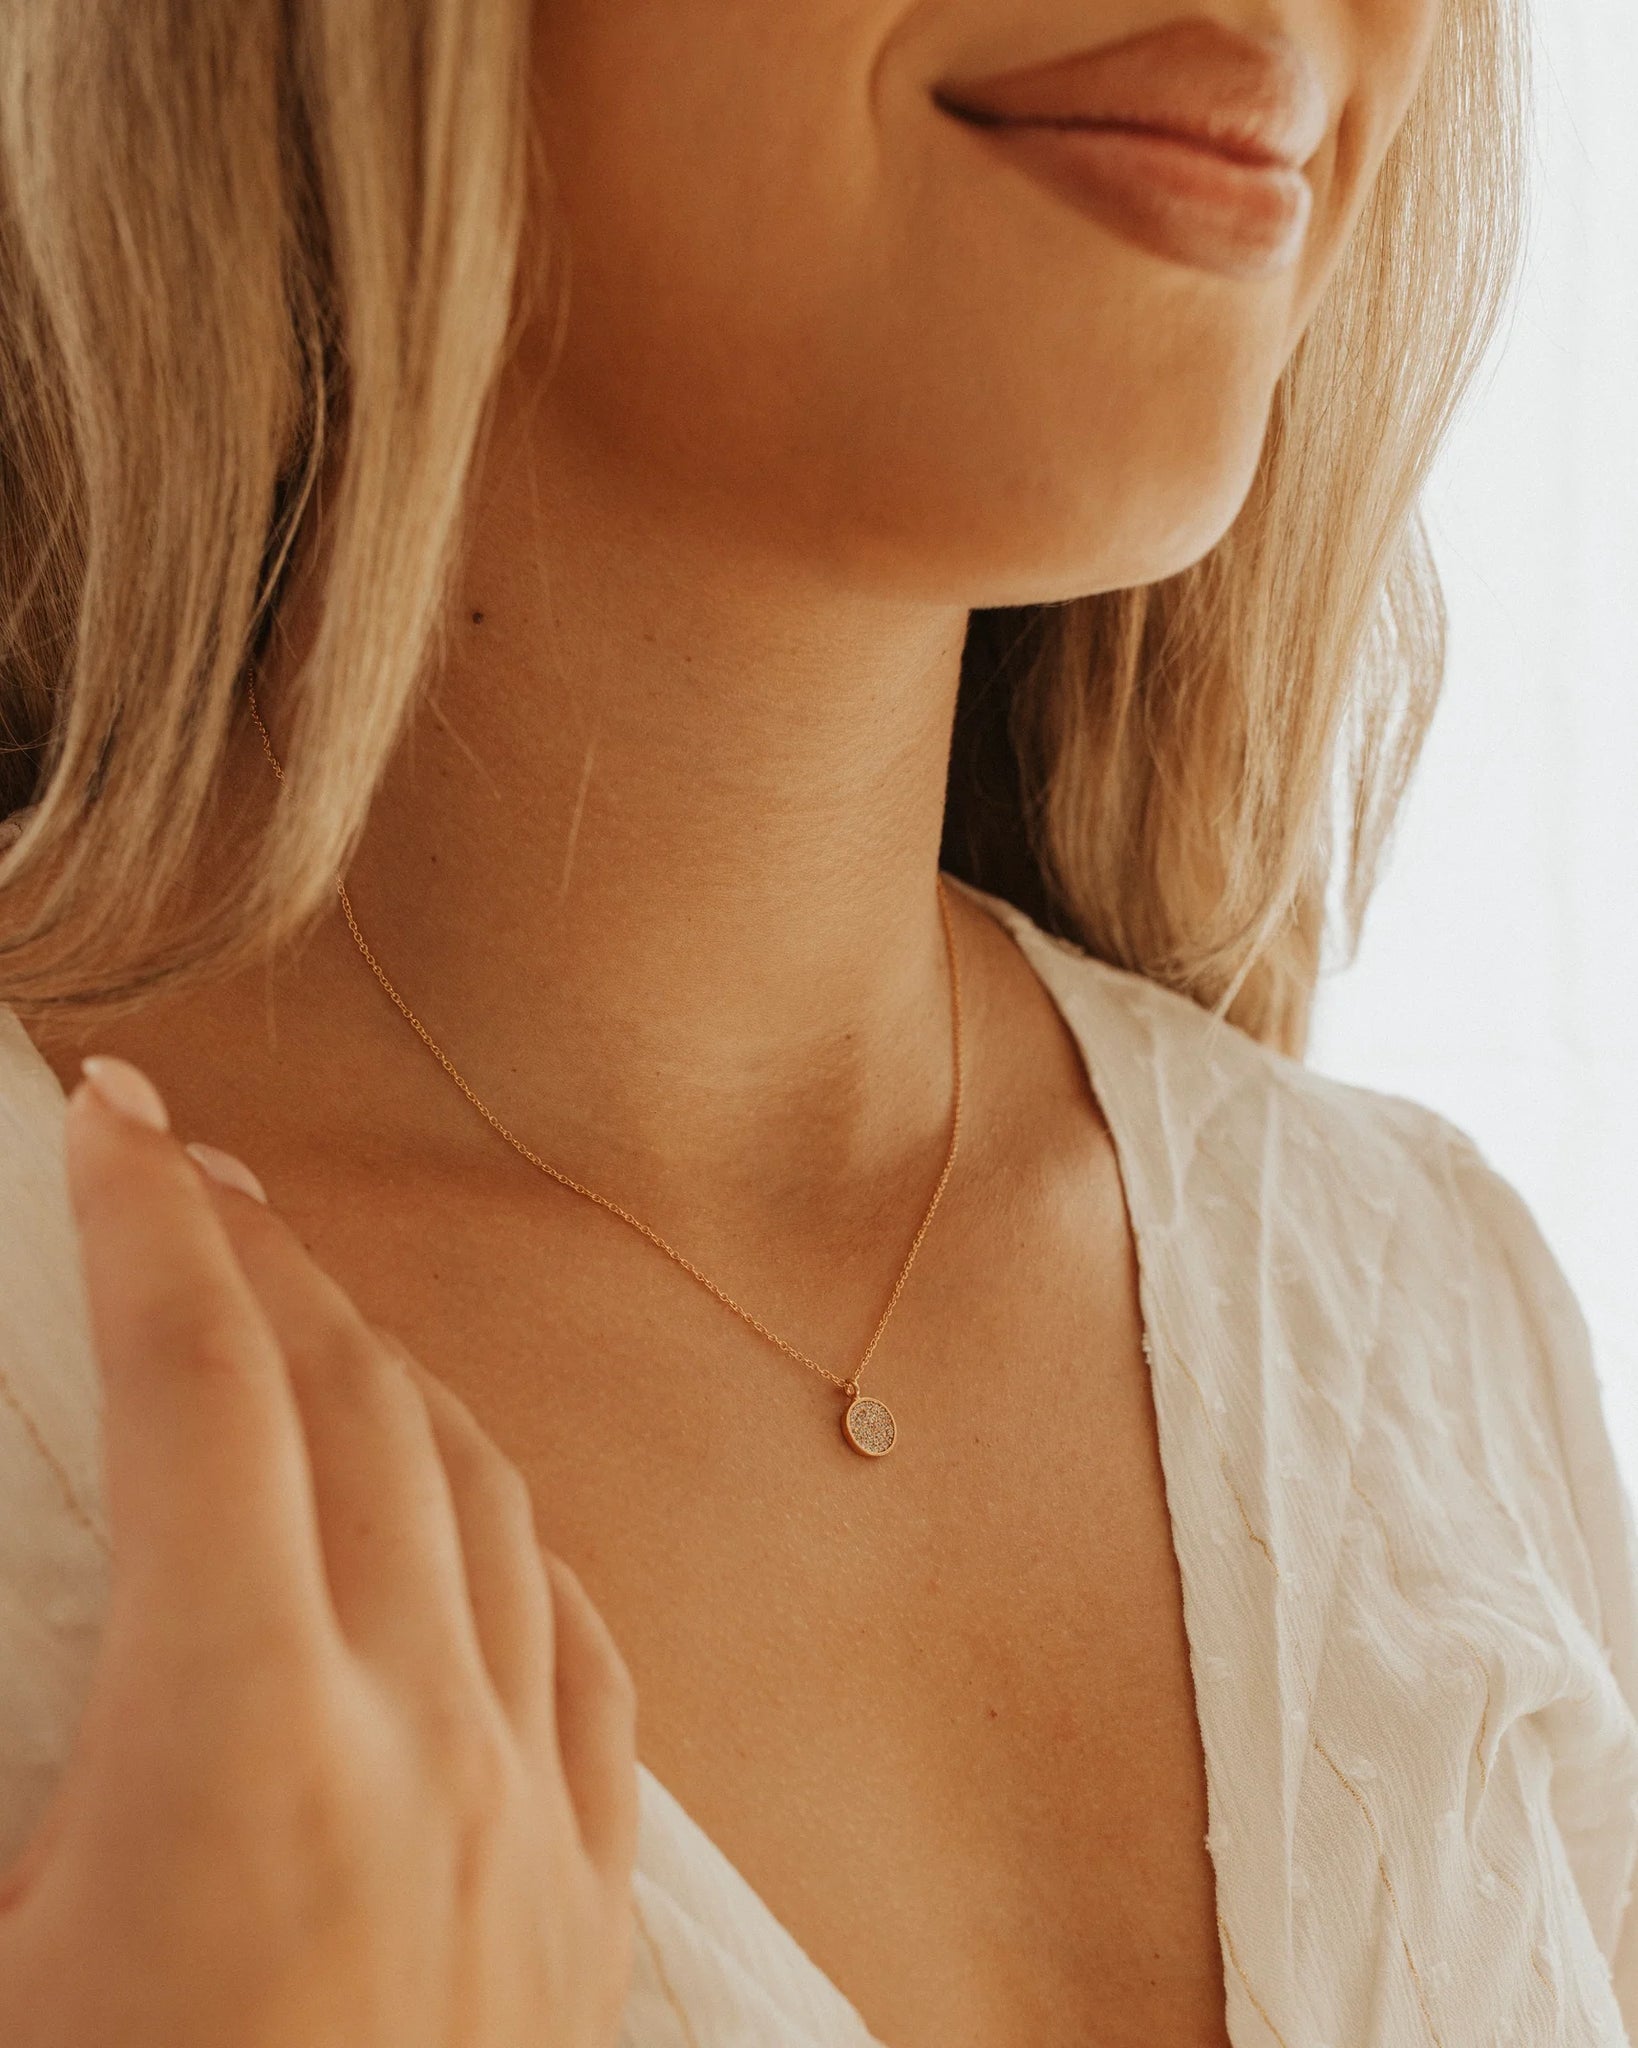 Poppy Necklace Silver - Falling for Dainty